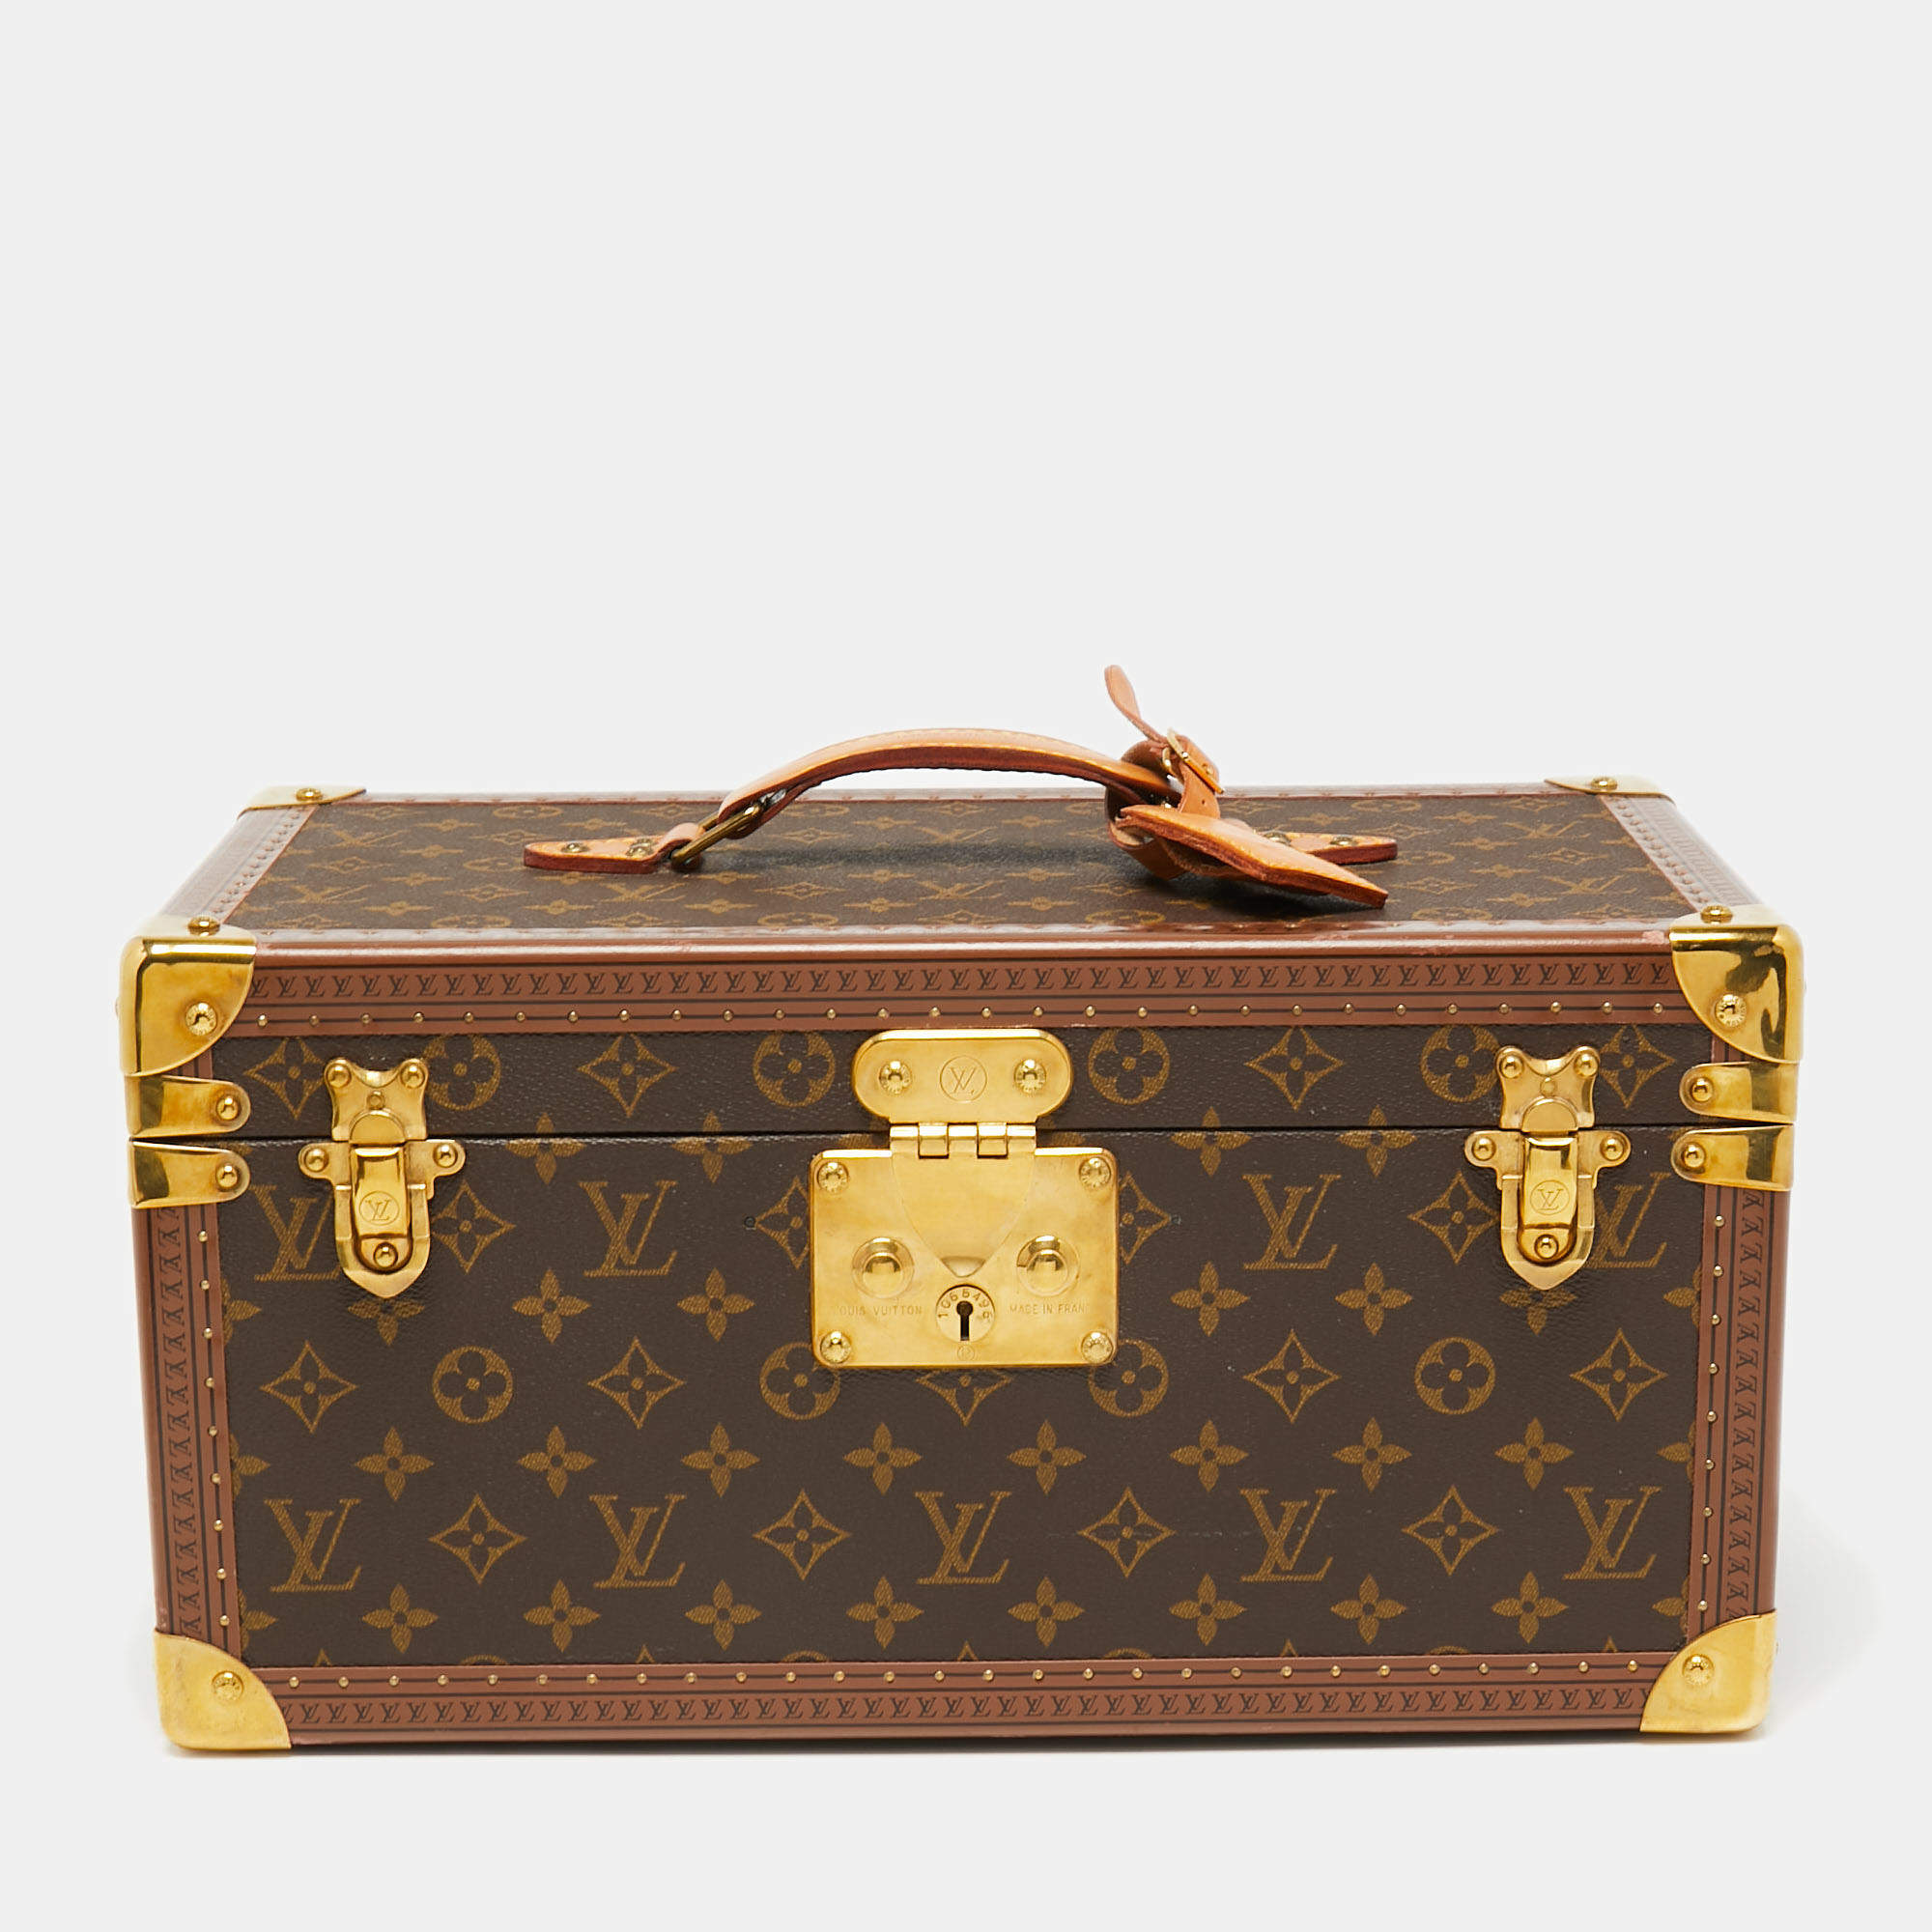 Louis Vuitton - Make-up your mind. The Studio in a Trunk and